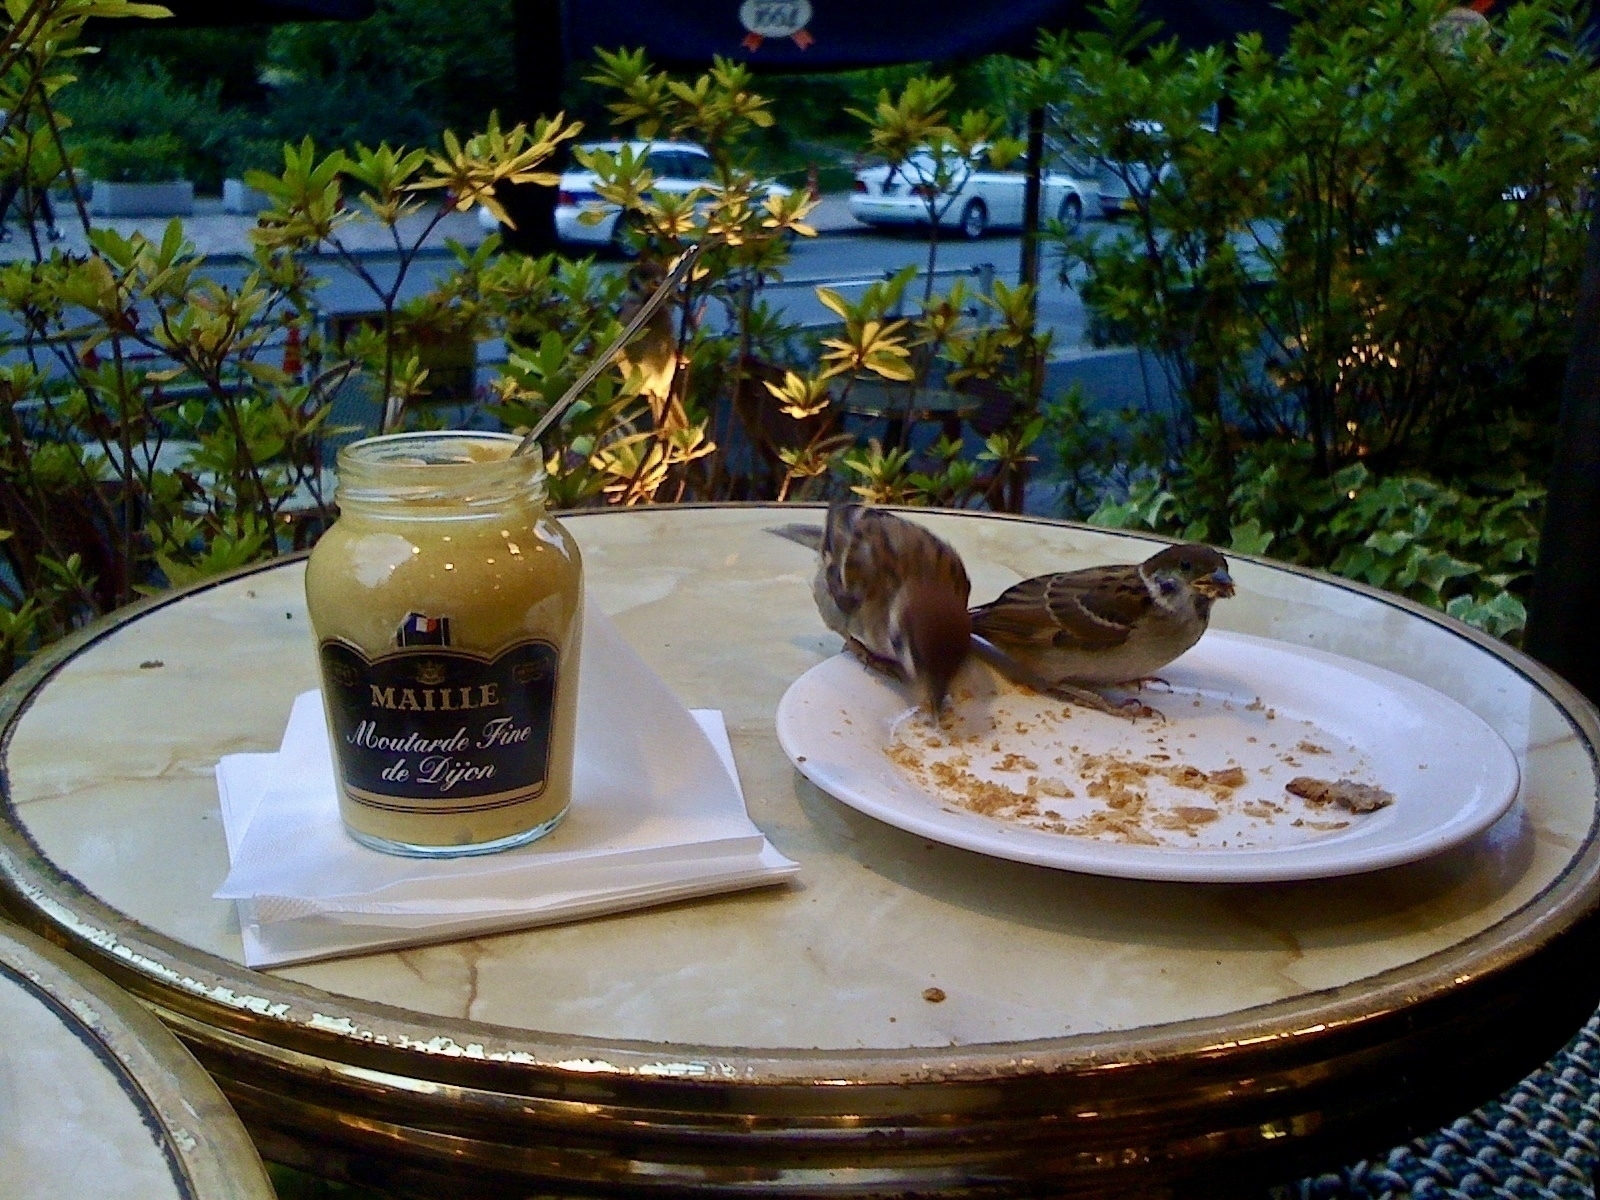 Birds on a plate eating the crumbs from a baguette, next to an open mustard jar, on a round table on a cafe terrace. 